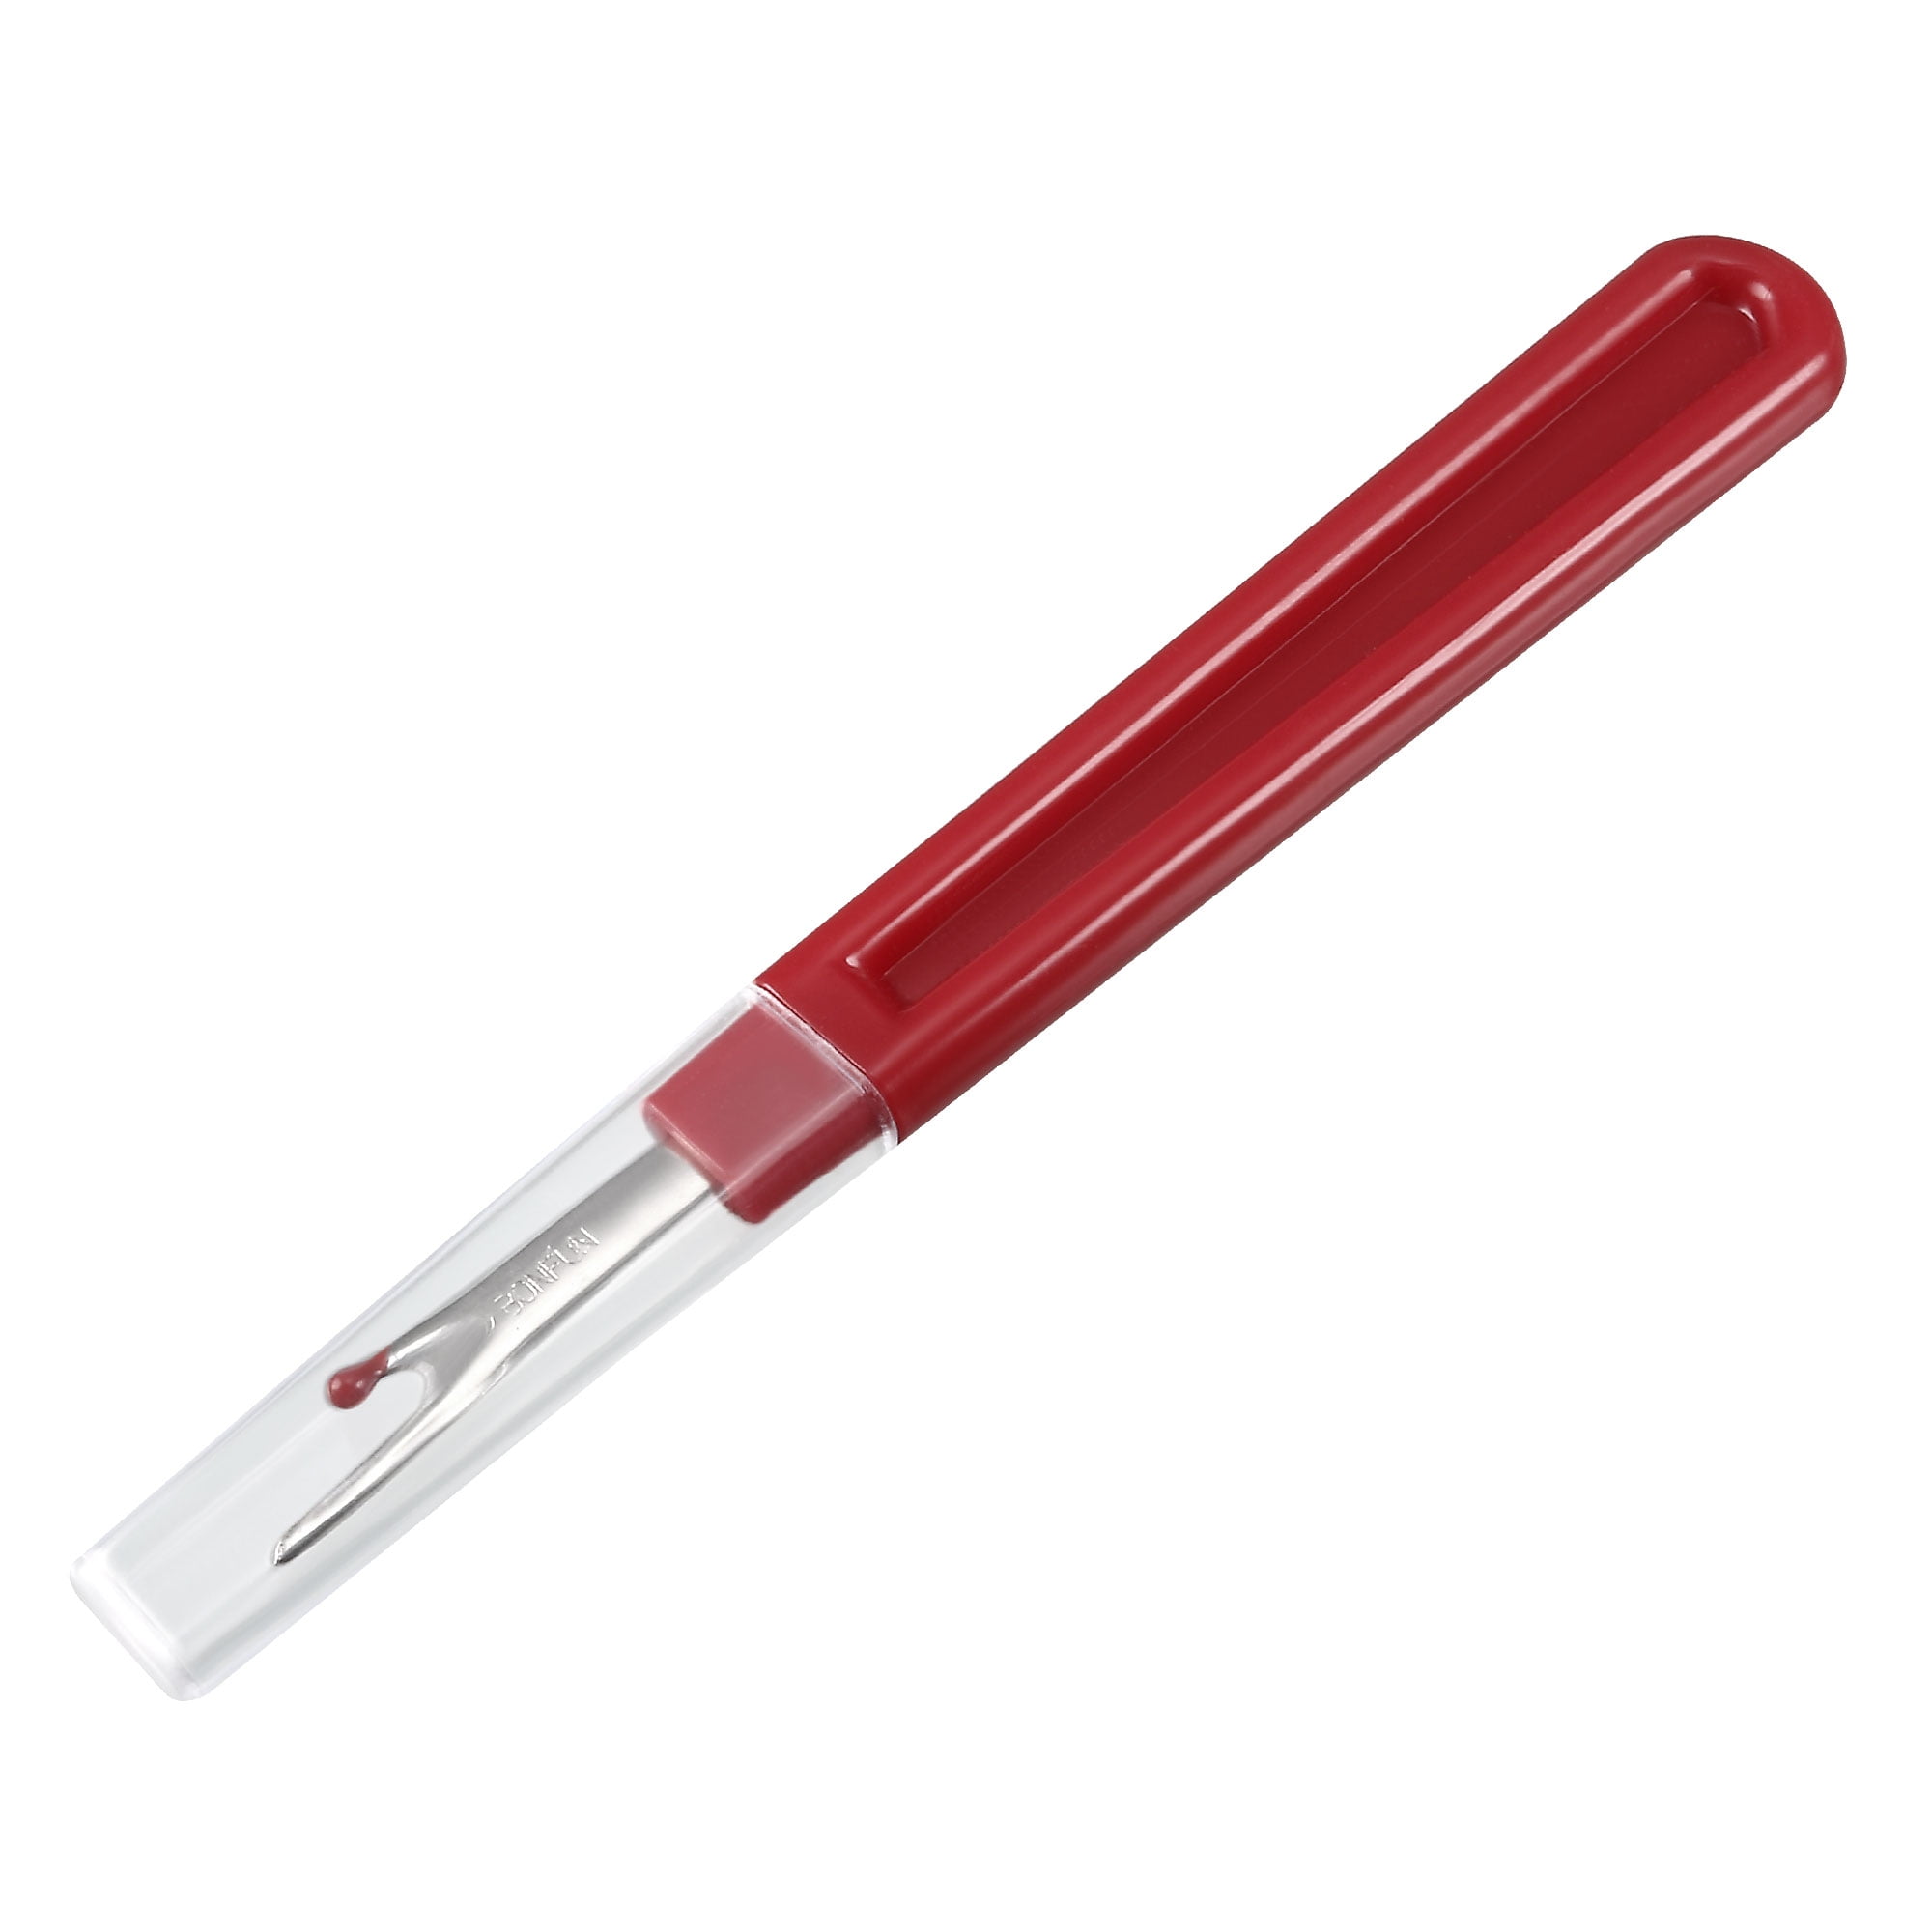 Uxcell 0.2cm Grip Sewing Seamstress Tailor Seam Cutter Tools Red Plastic, Size: 13.5 x 0.2cm/ 5.3 x 0.008''(Large*W)